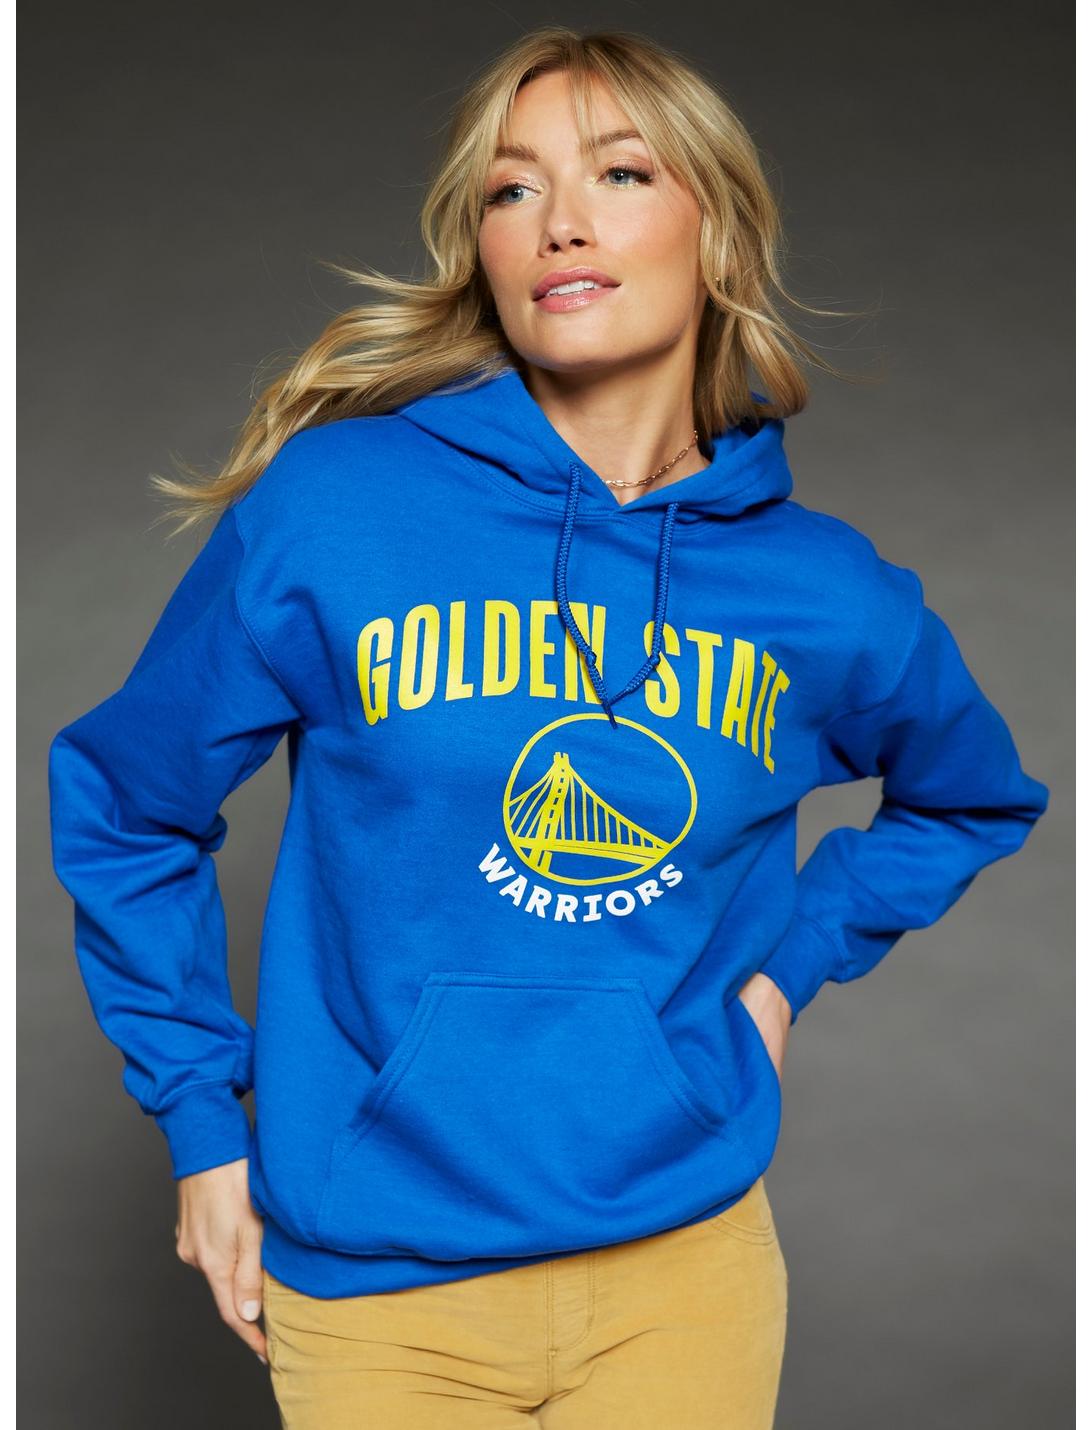 golden state warriors jerseys for sale